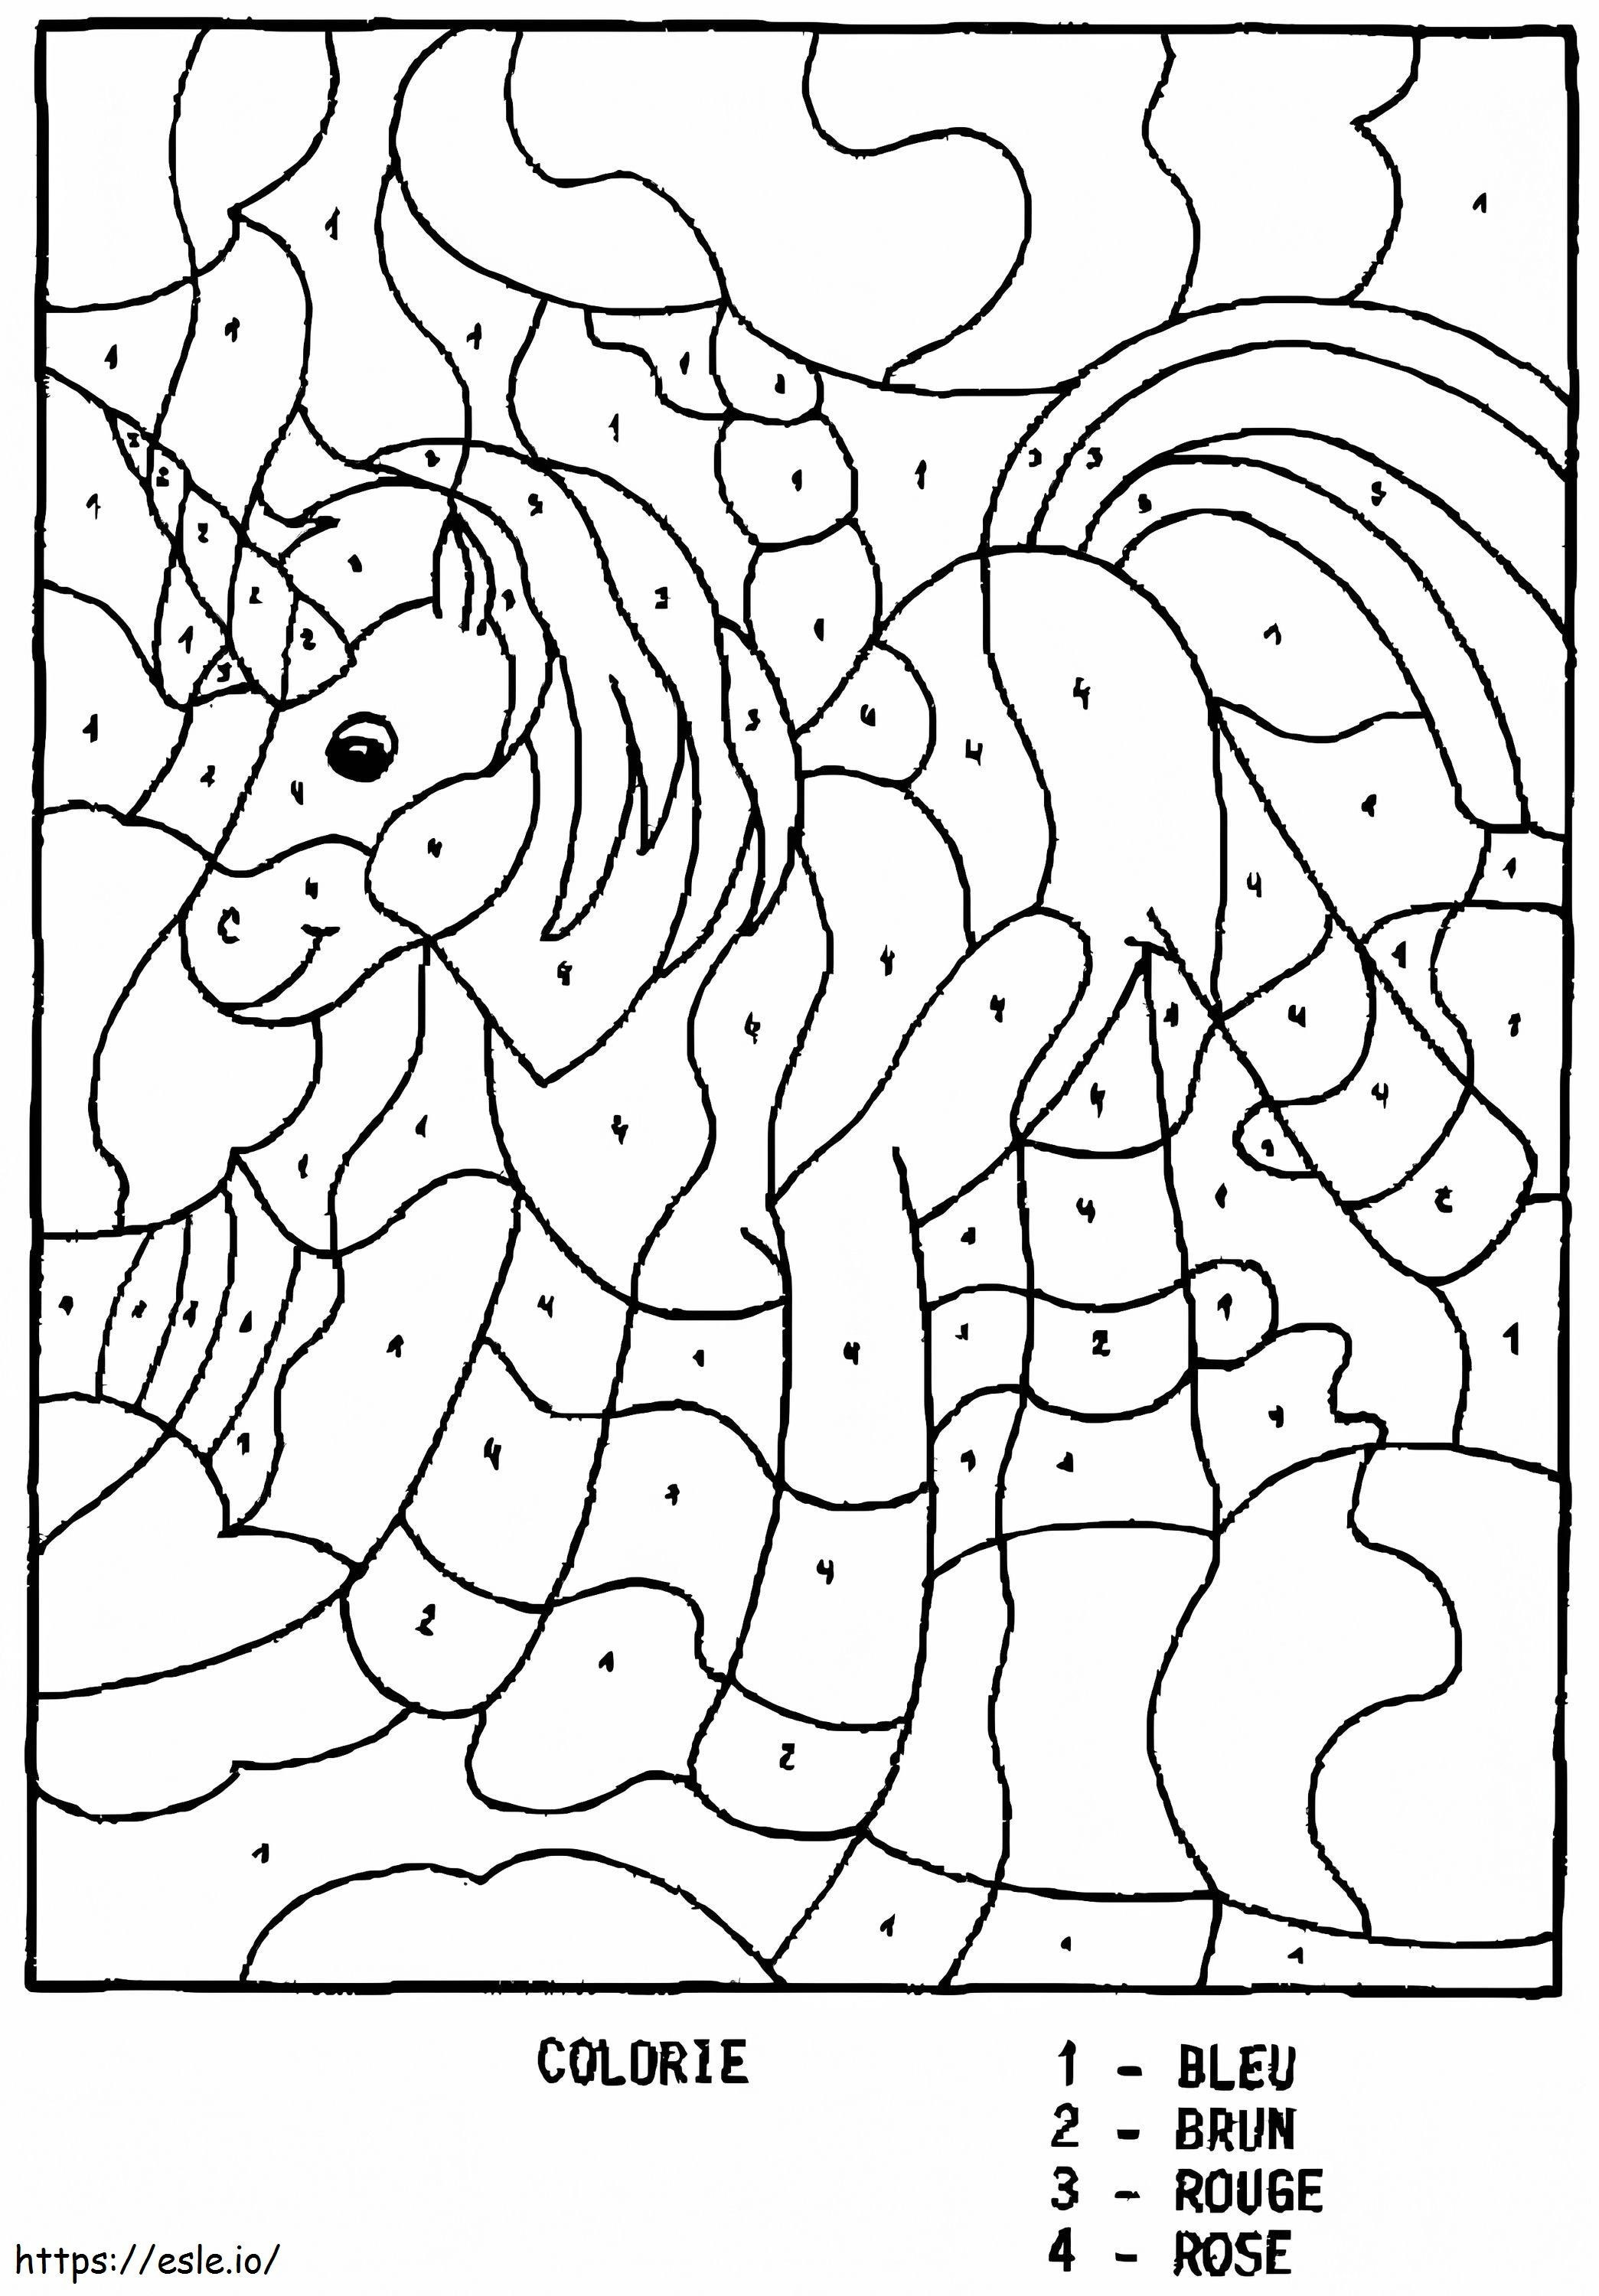 Magical Unicorn 1 coloring page